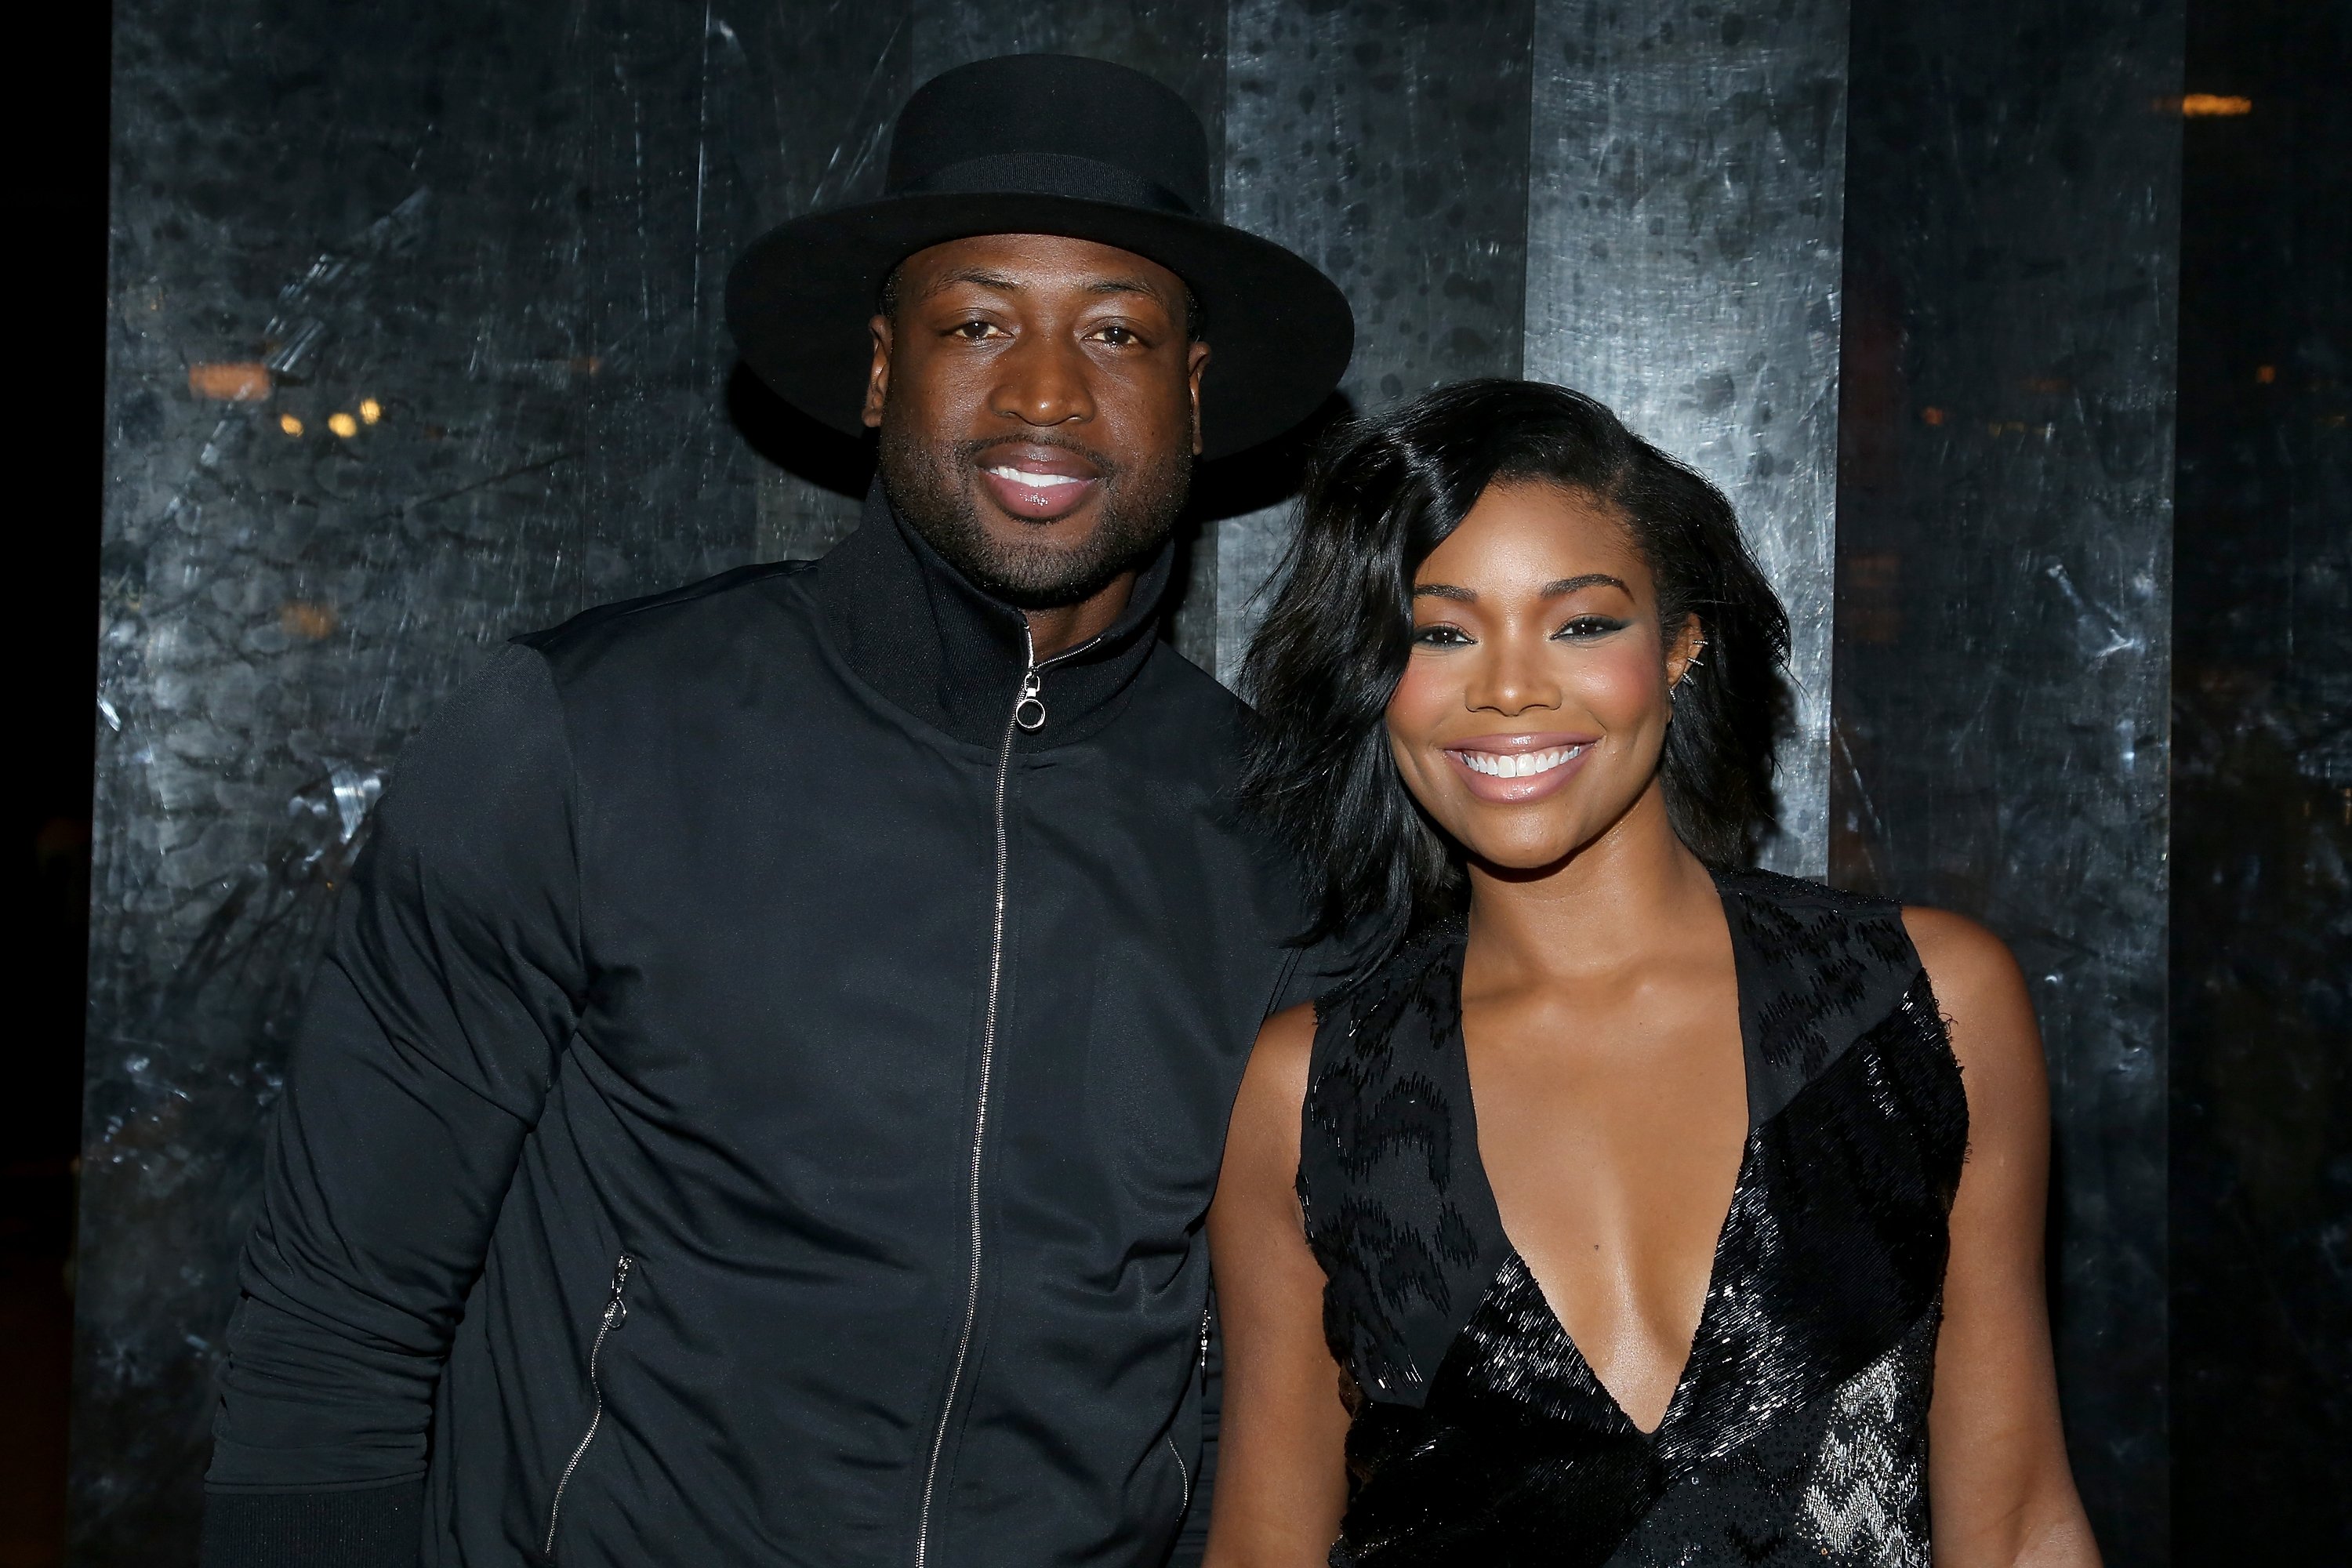 Gabrielle Union & Dwyane Wade during New York Fashion Week on Sept. 13, 2015 in New York City. | Photo: Getty Images